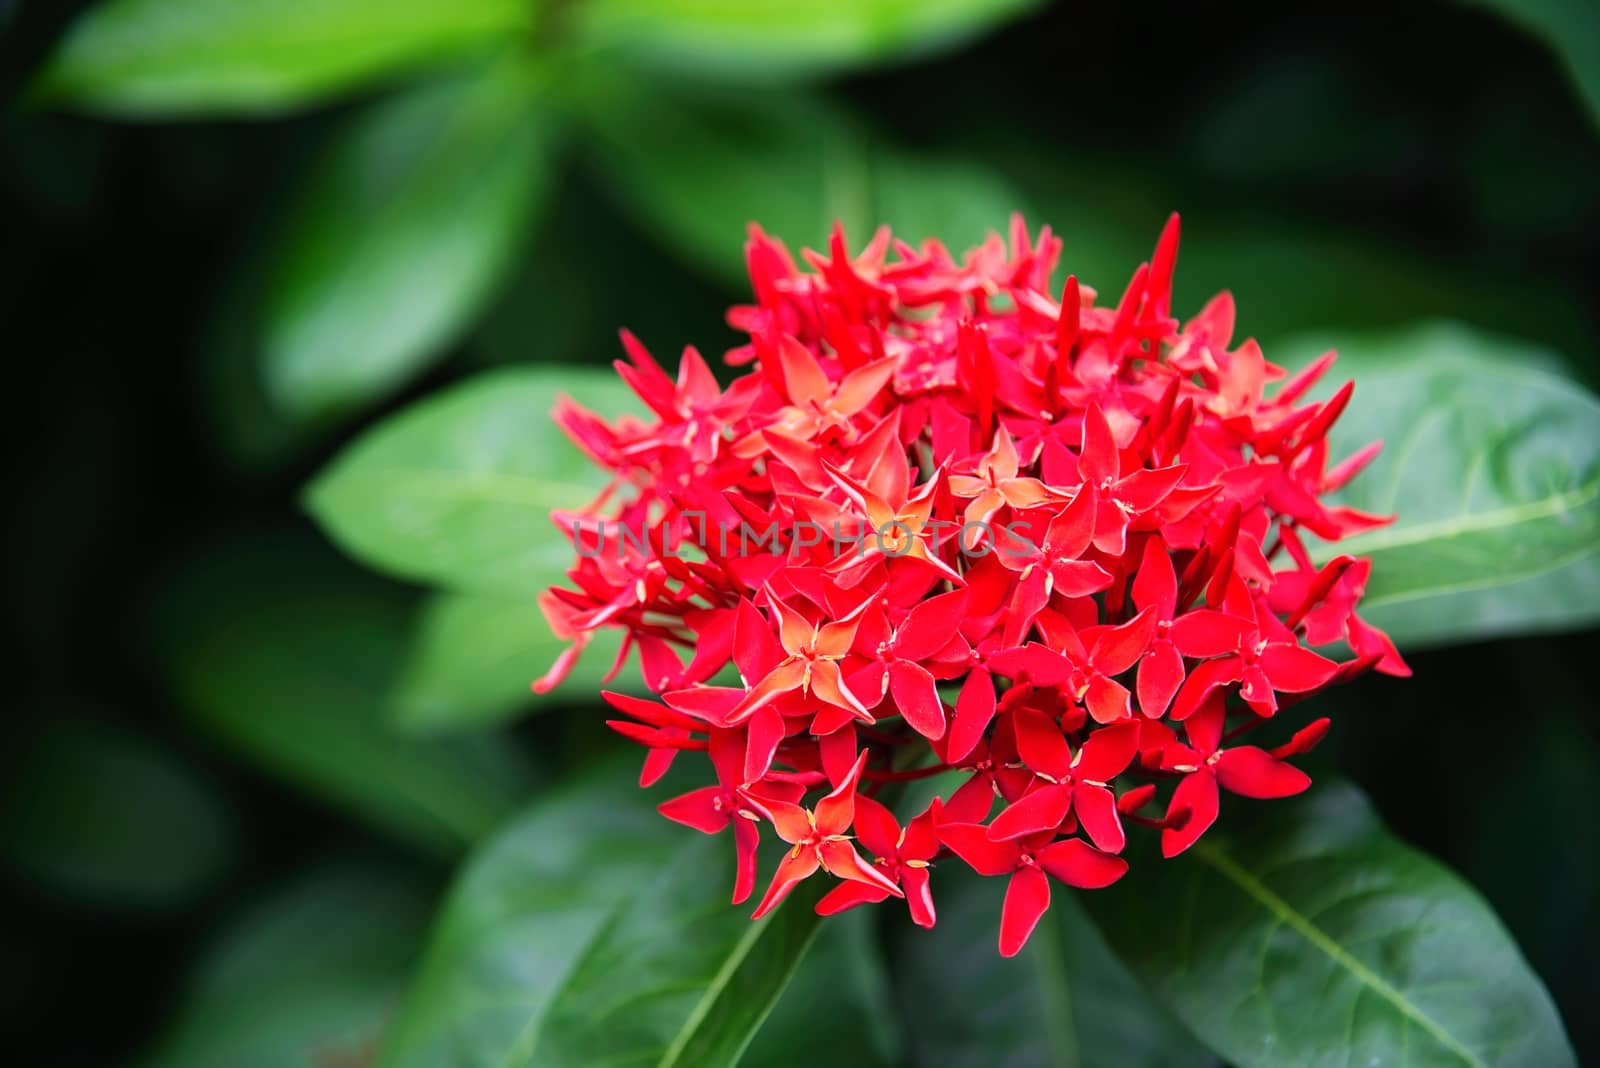 Fresh red flower called ixora with its green leave - beautiful red flower for background use